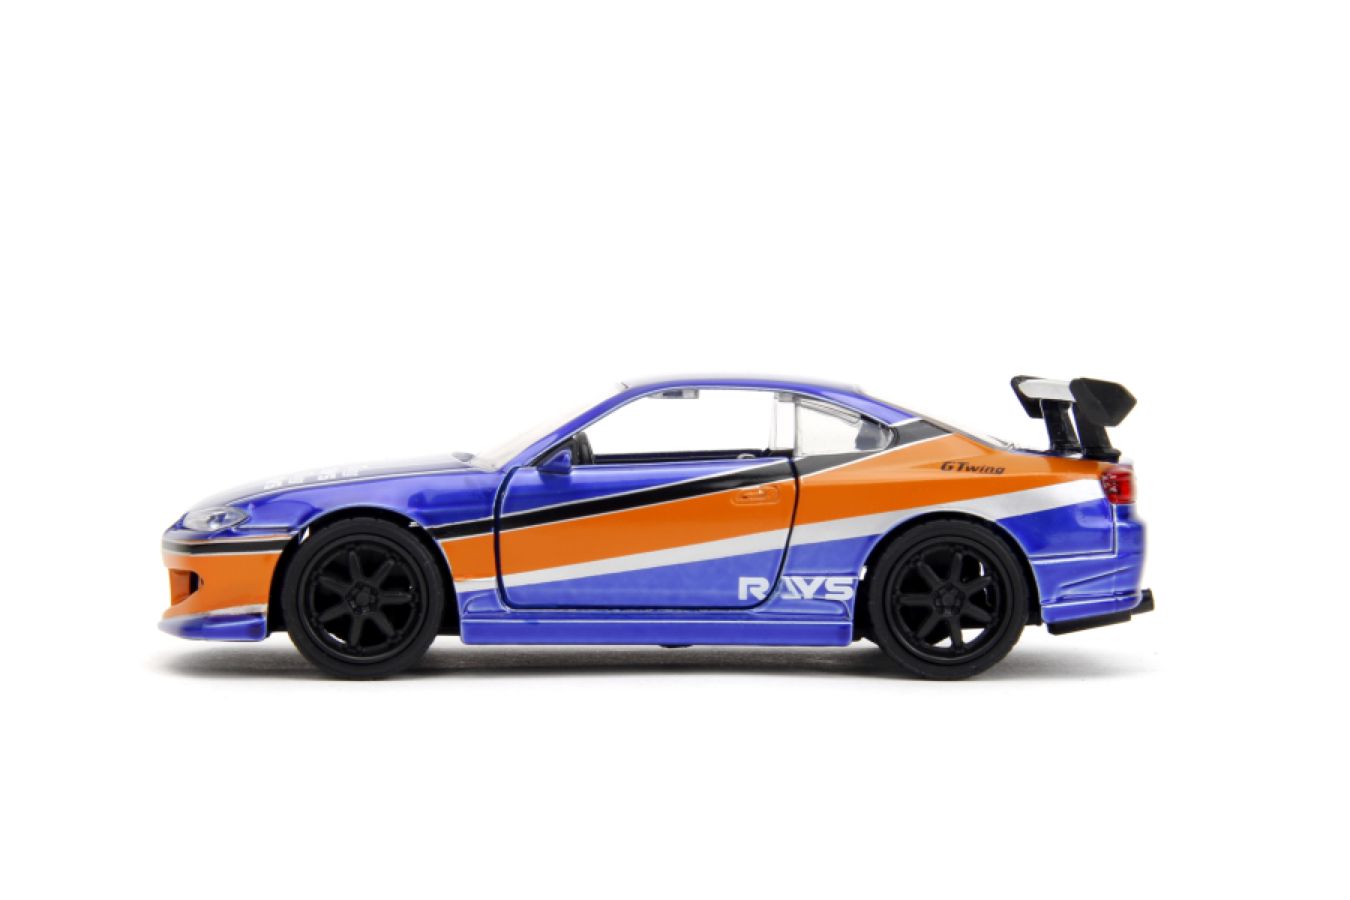 Fast and the Furious - Han's 2001 Nissan Silvia S15 1:32 Scale Diecast Vehicle